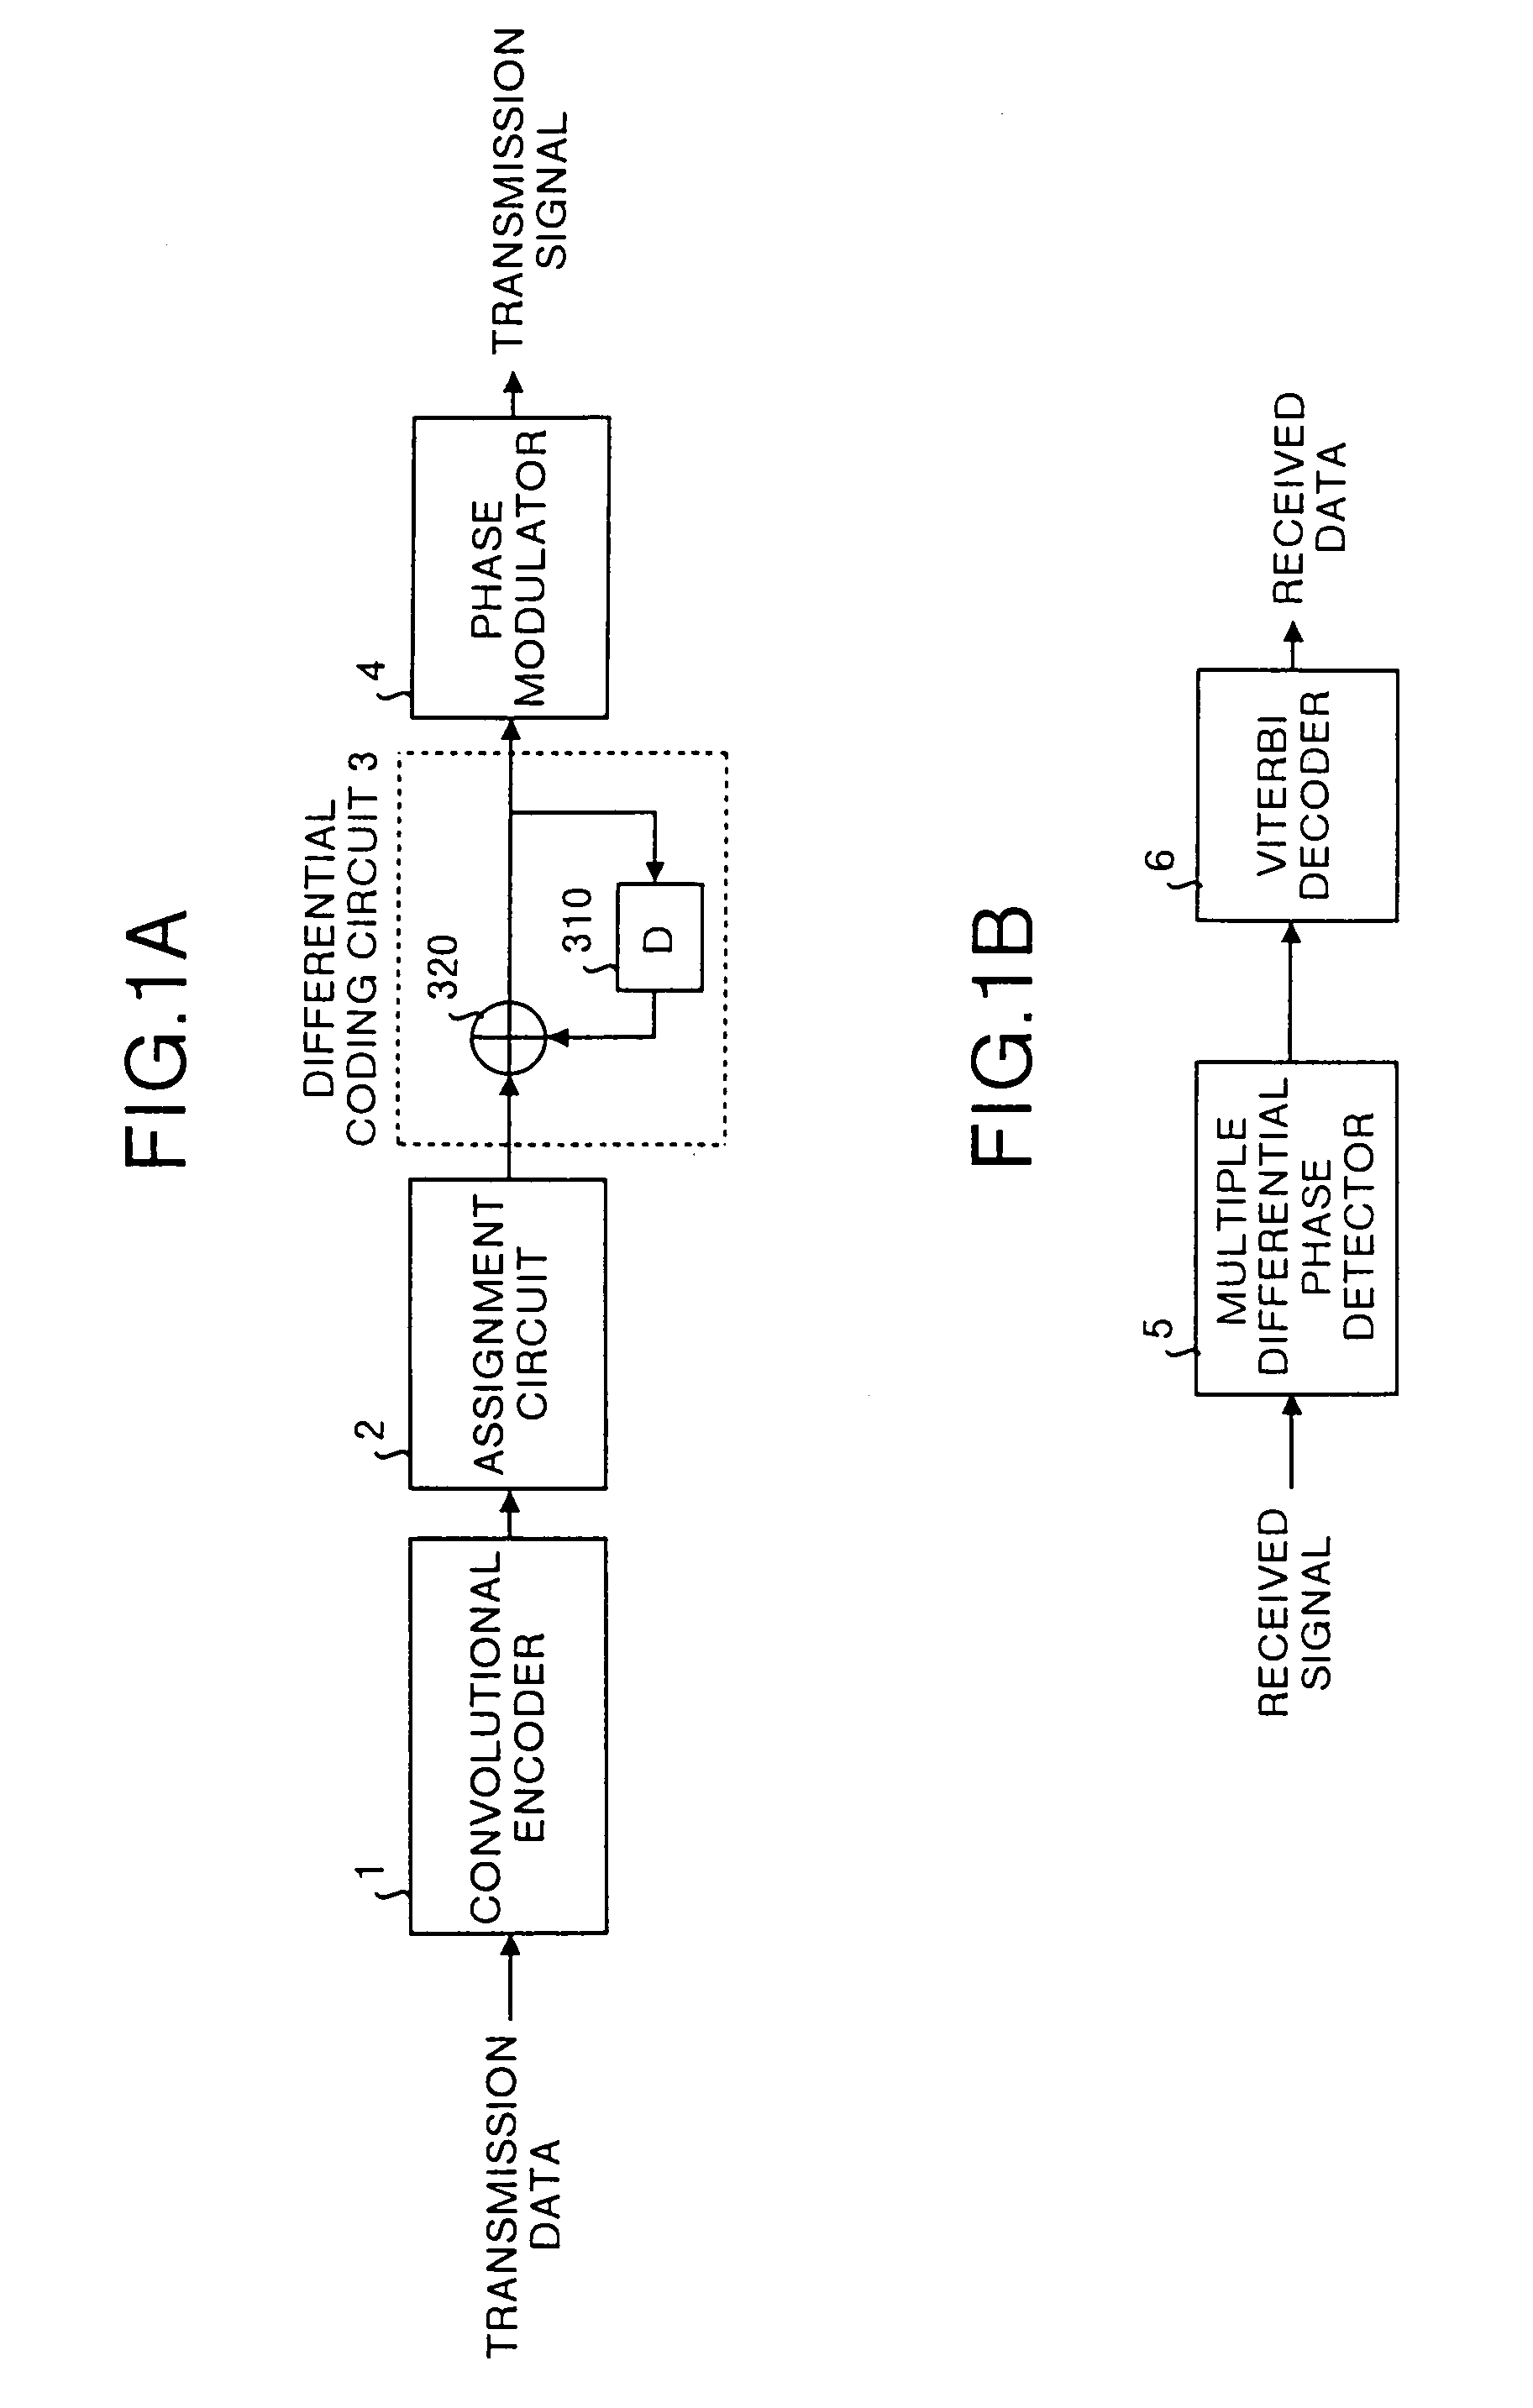 Demodulator, receiver, and communication system